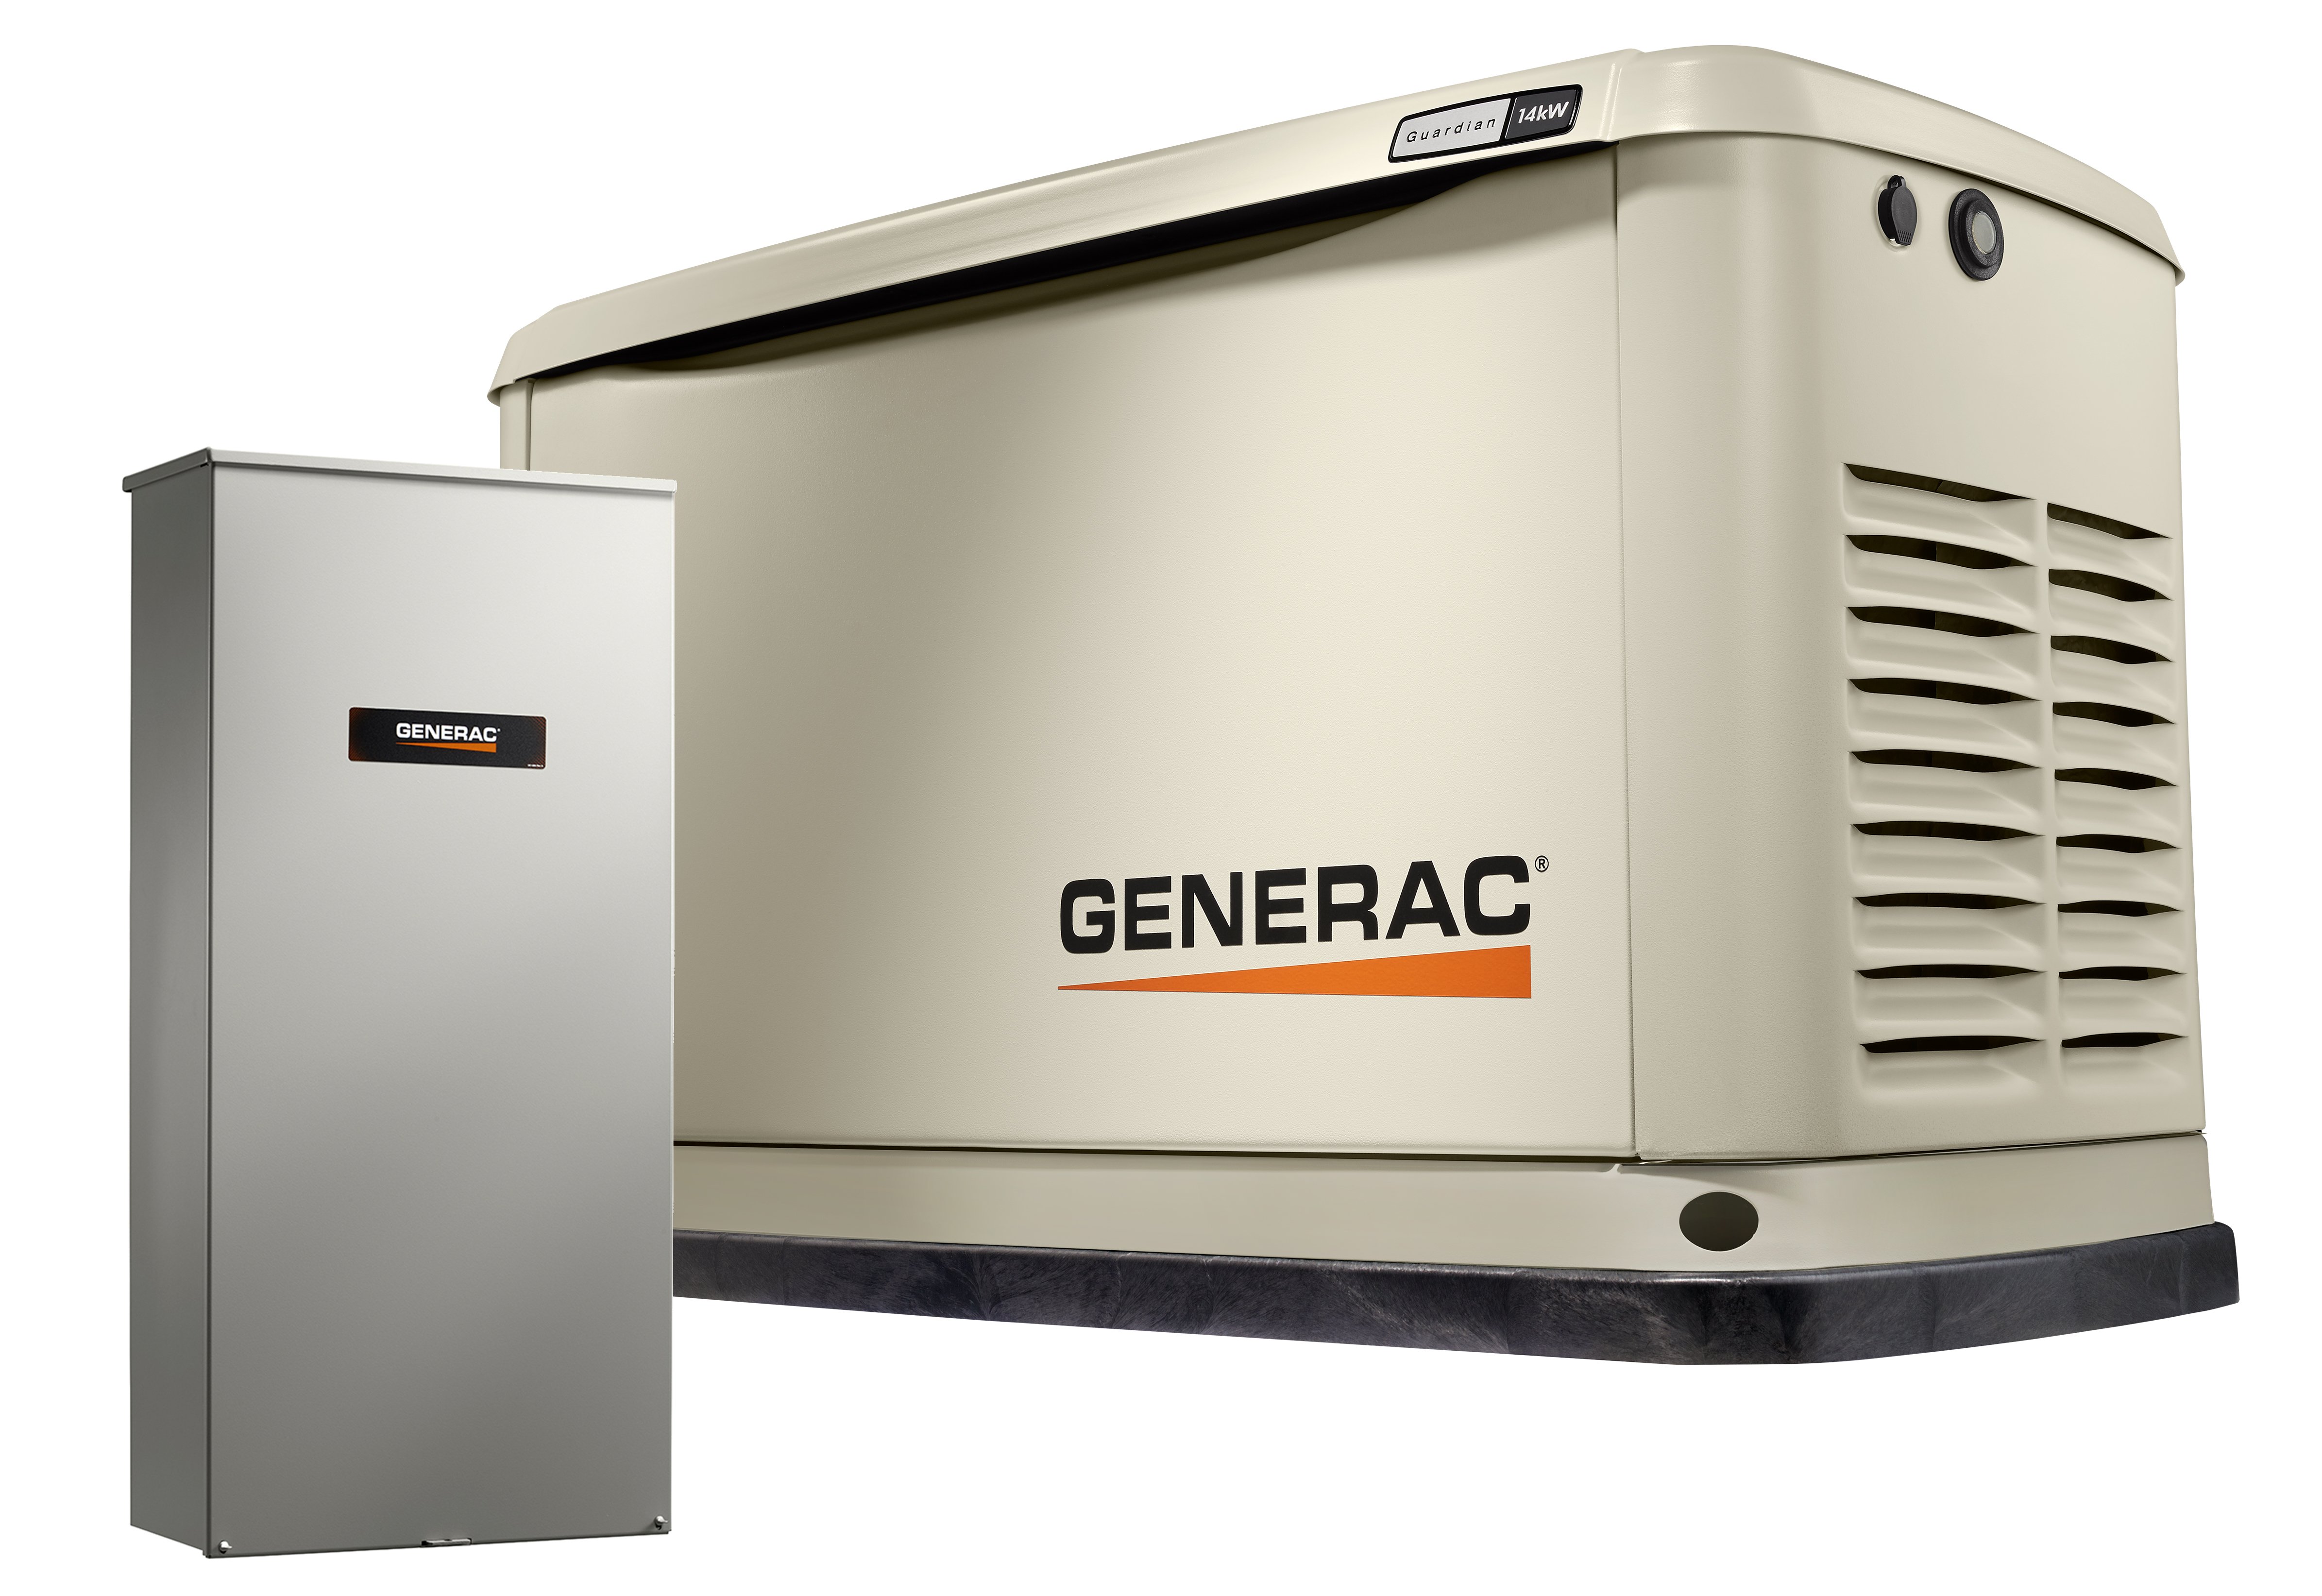 Standby Generator 14kW with 16-circuit Transfer Switch WiFi-Enabled MODEL #7224 product image